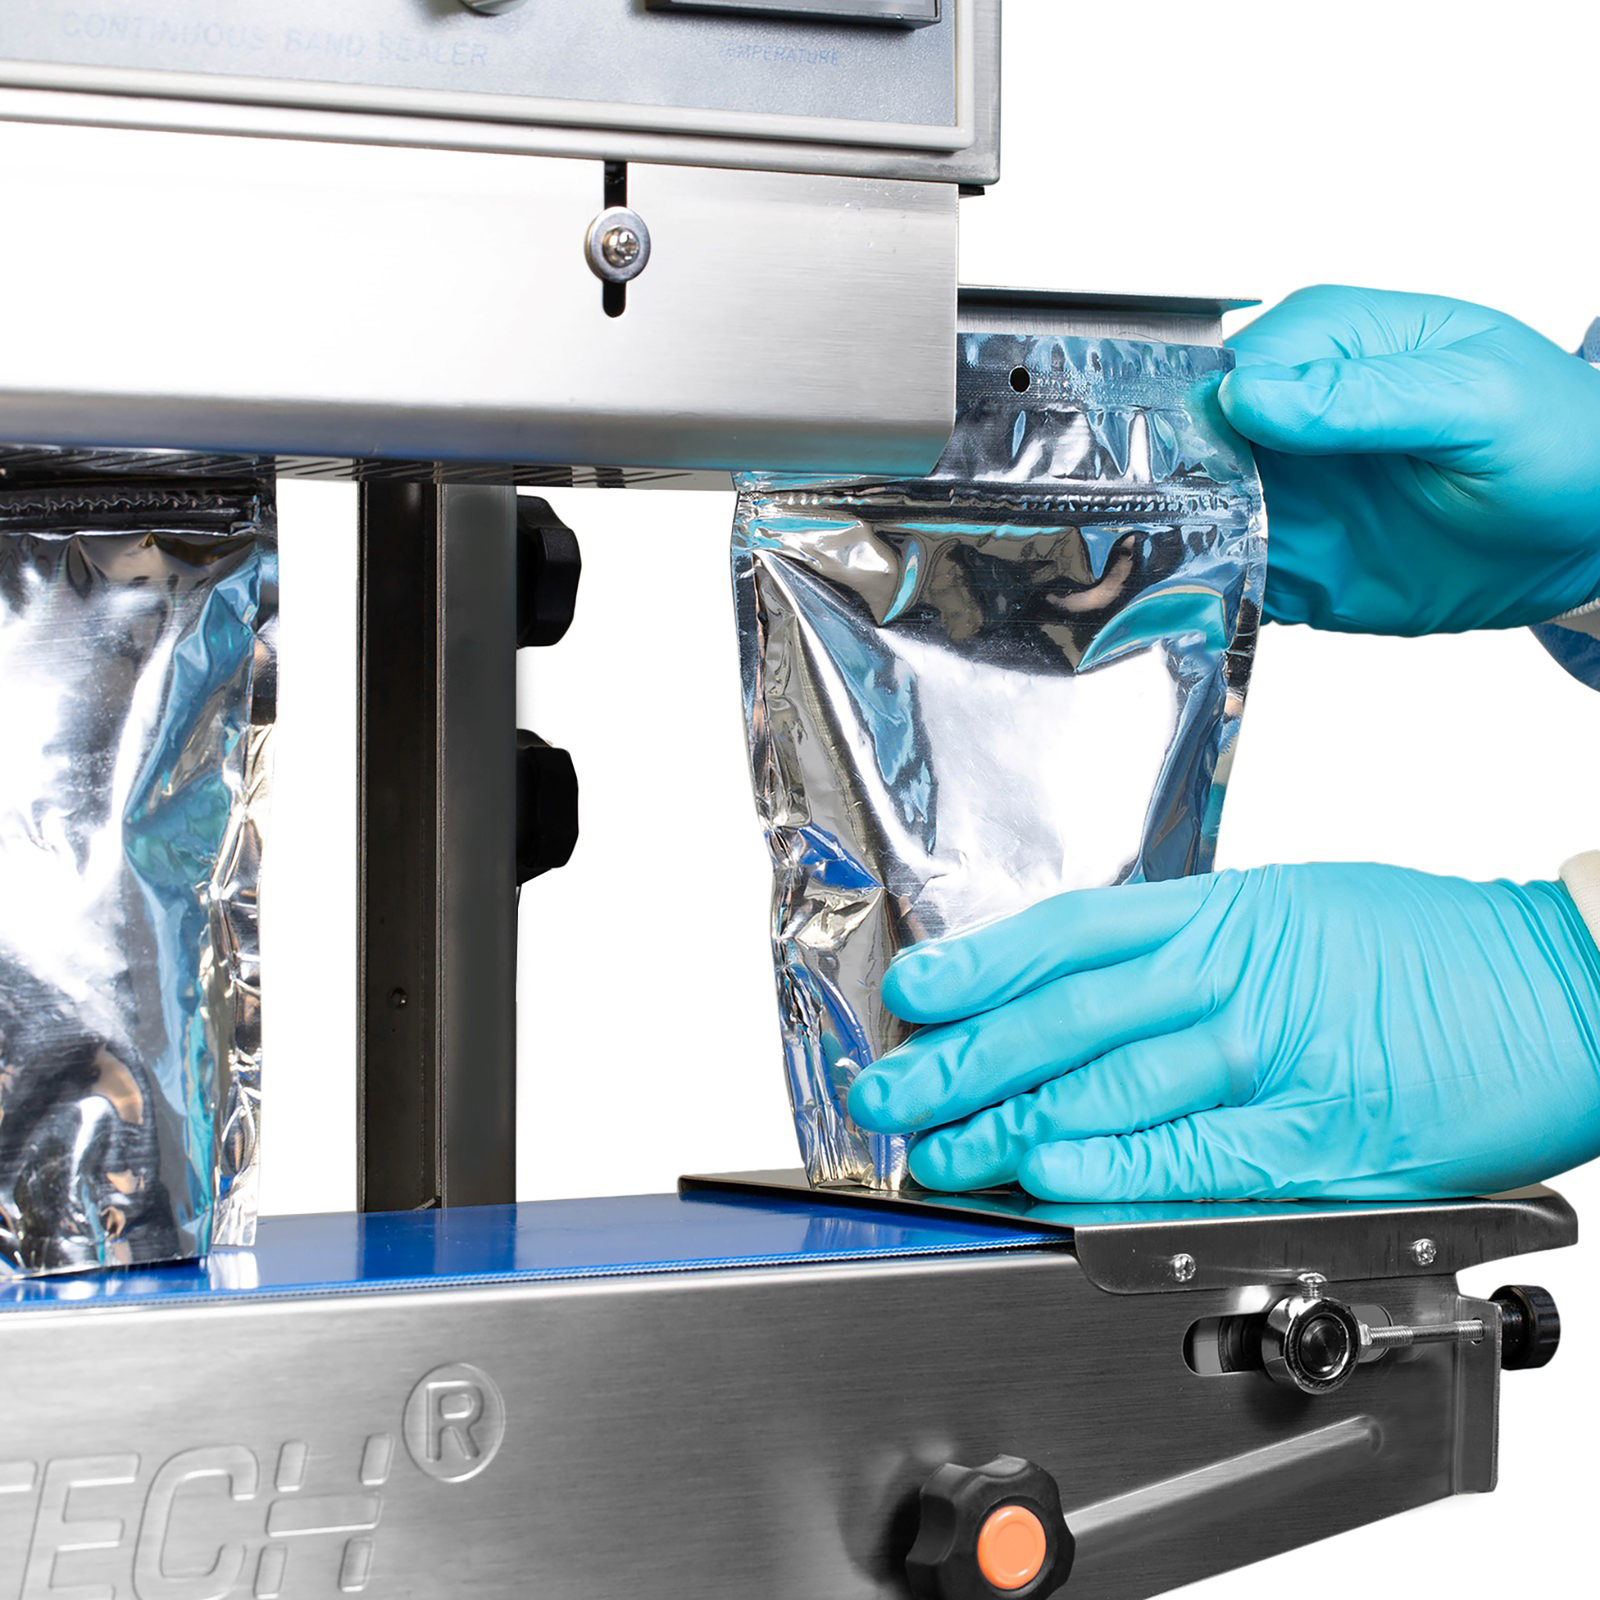 an operator wearing blue gloves inserting silver plastic bag in the JORESTECH continuous band sealing machine to seal them closed